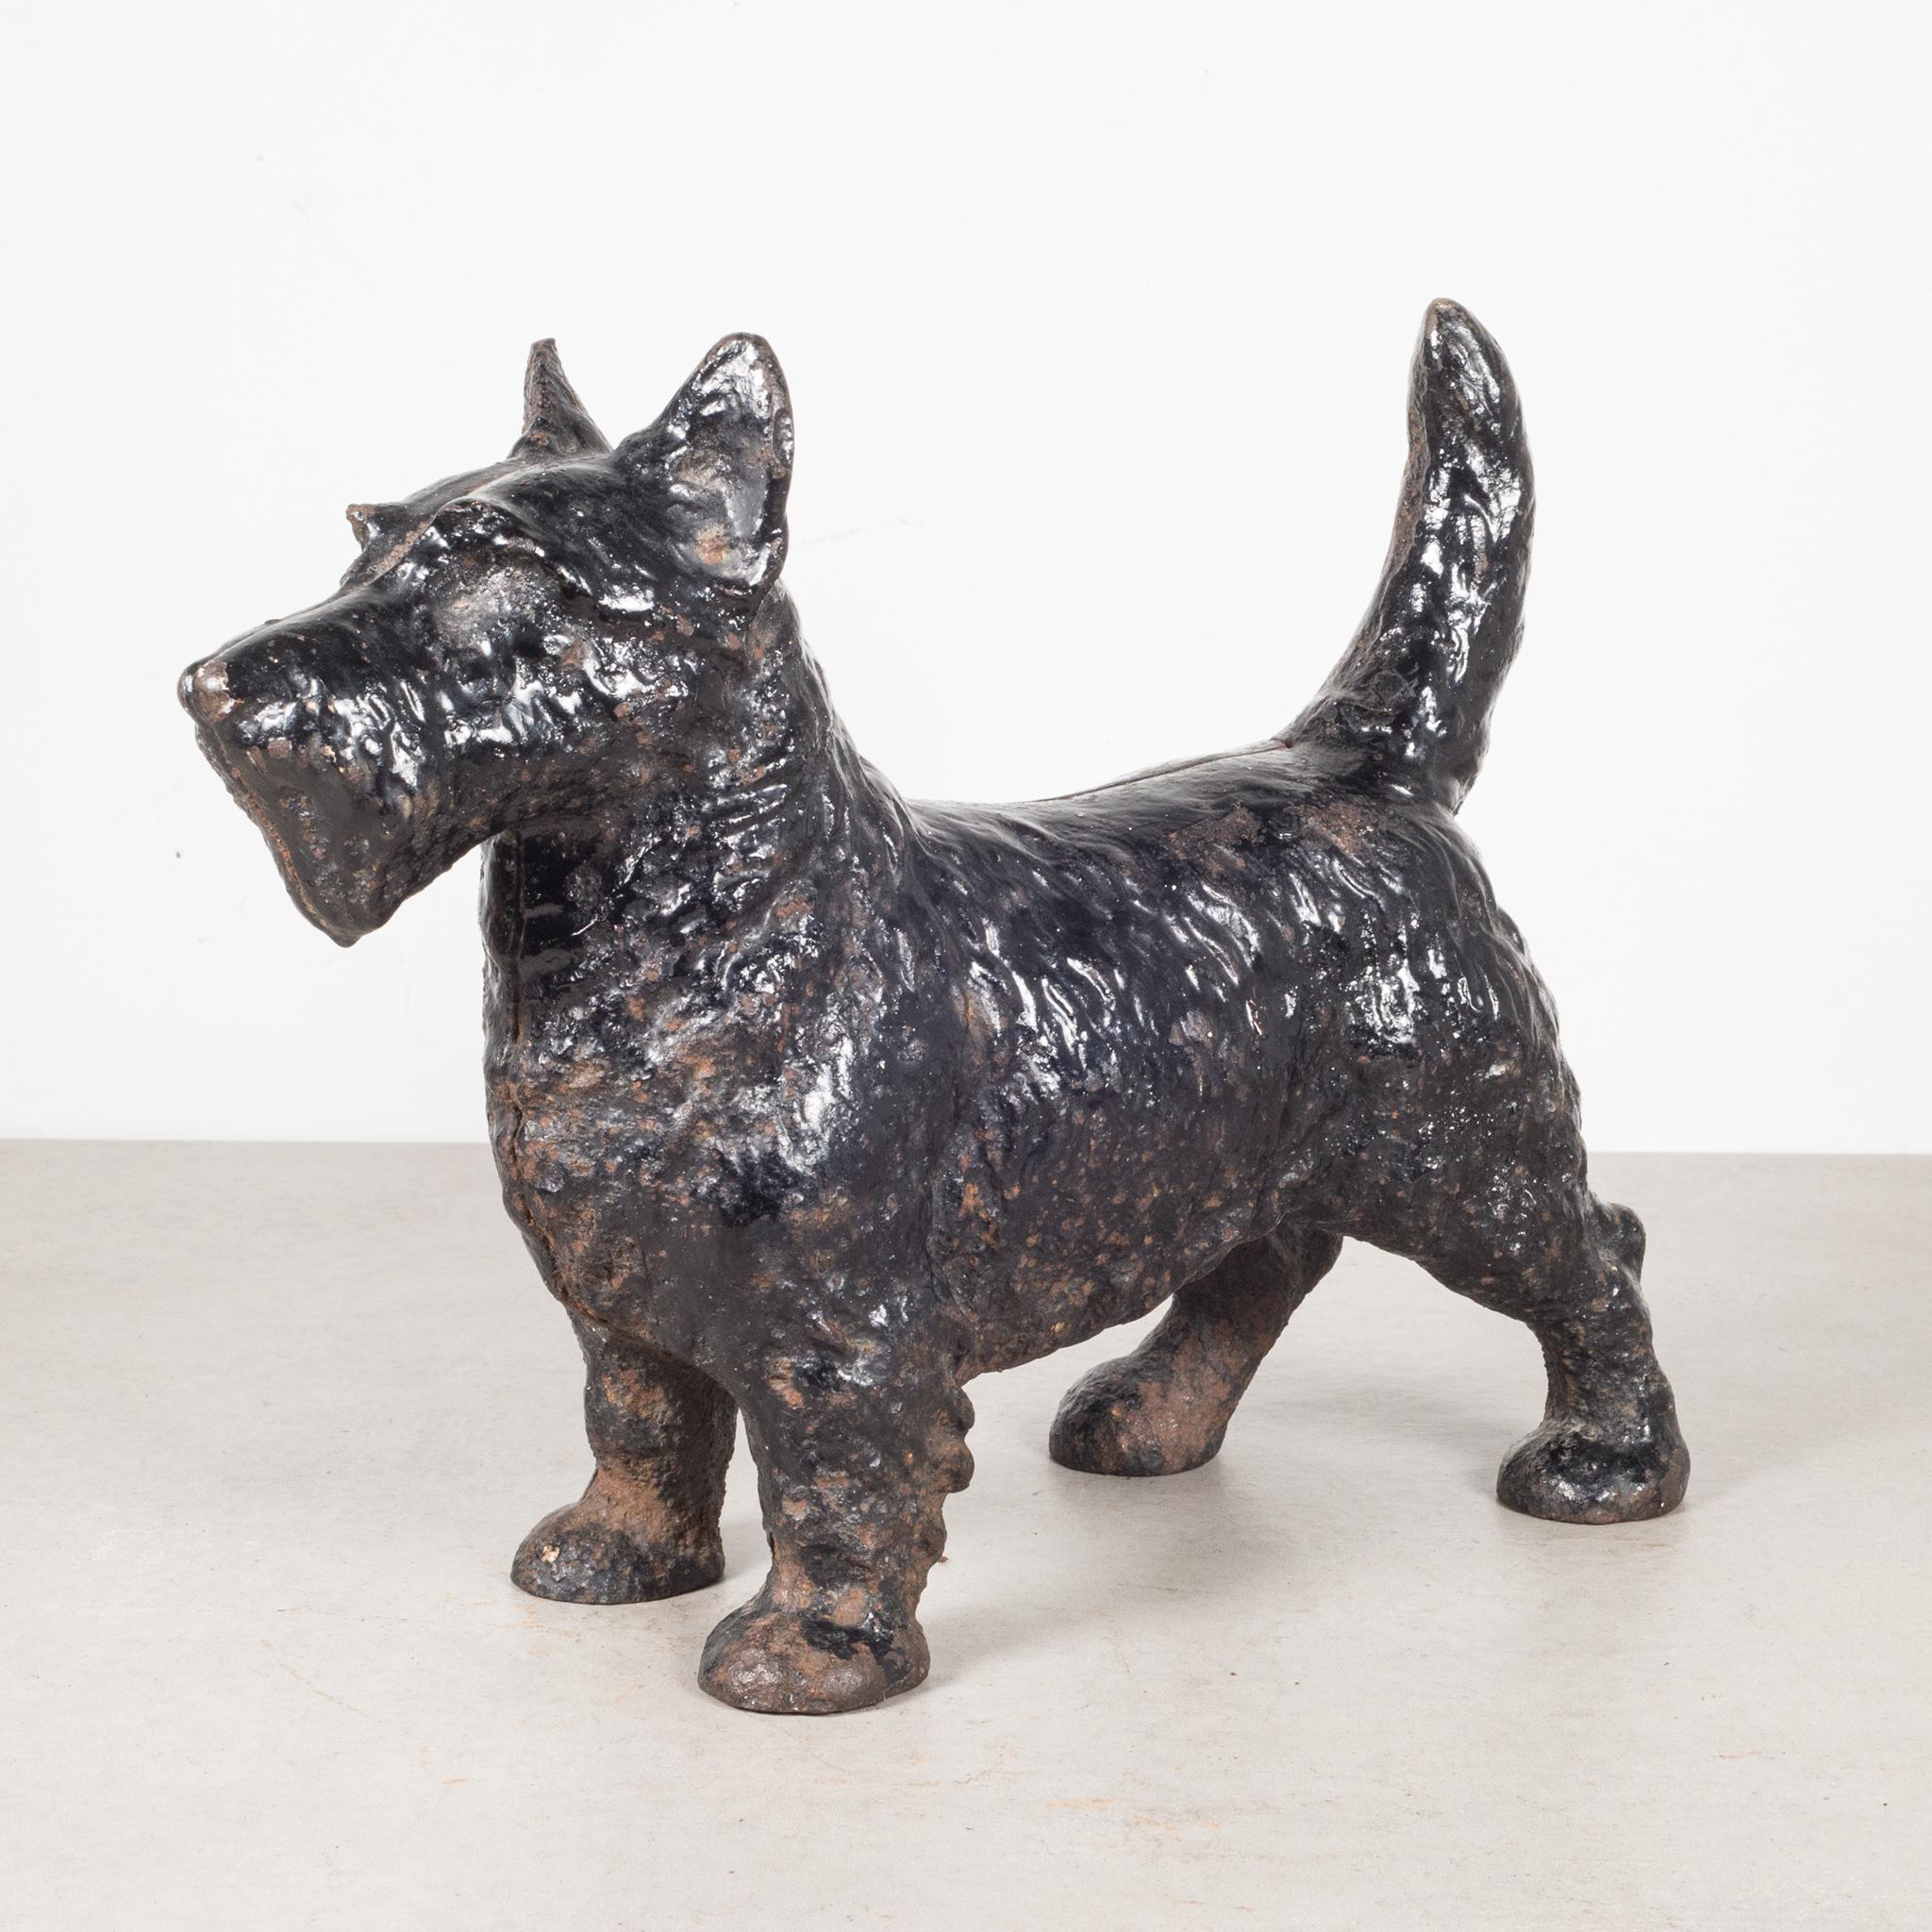 Industrial Early 20th C. Cast Iron Scottish Terrier Doorstop by Hubley, c.1910-1940